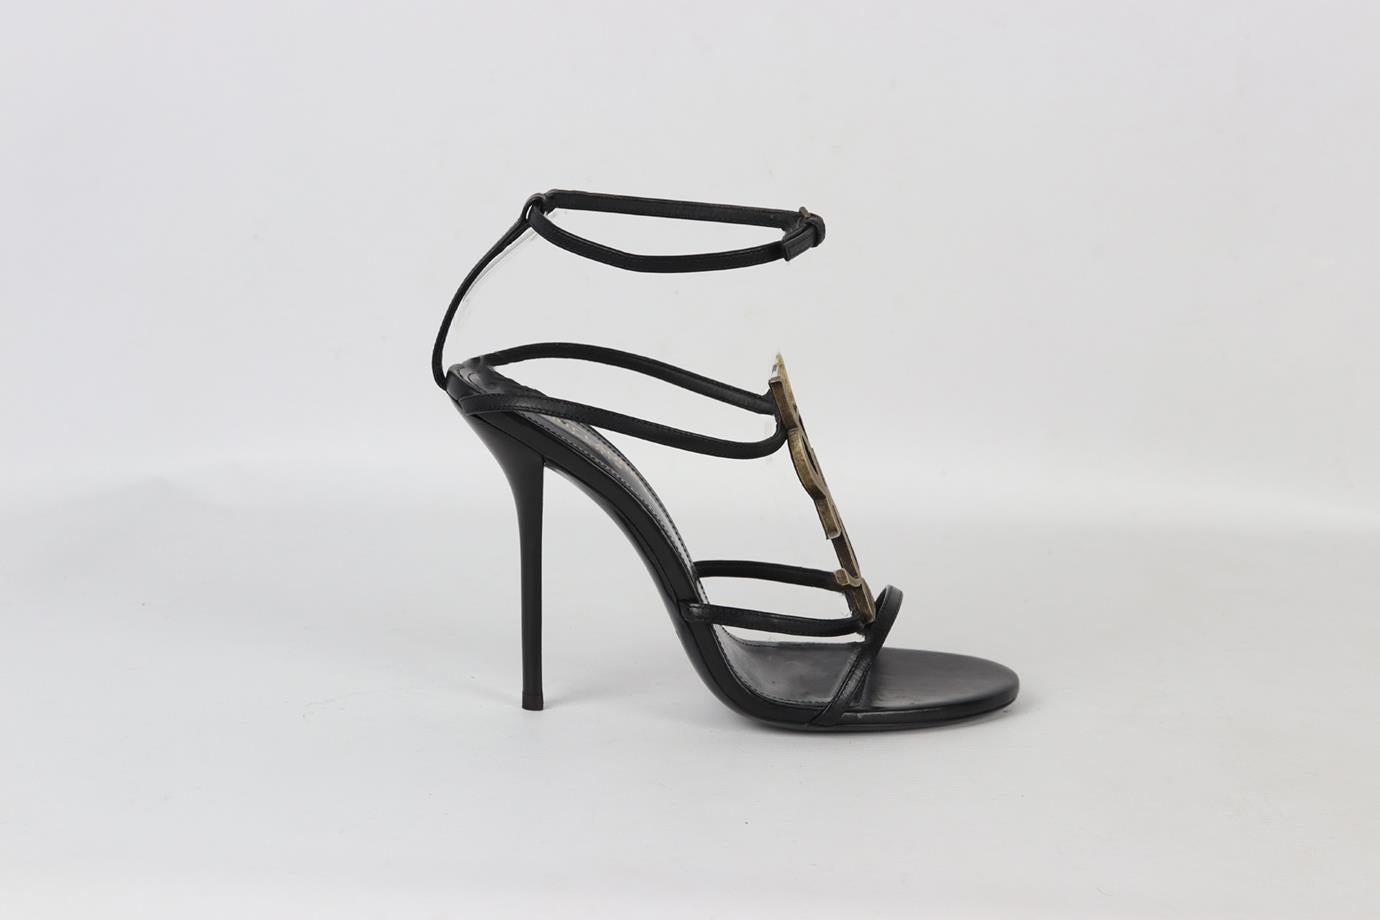 Saint Laurent Cassandra logo embellished leather sandals. Black. Buckle fastening at side. Does not come with dustbag or box. Size: EU 38 (UK 5, US 8). Insole: 9.5 in. Heel Height: 4 in. Platform: 0.2 in. Used. Very good condition - Worn once. Light